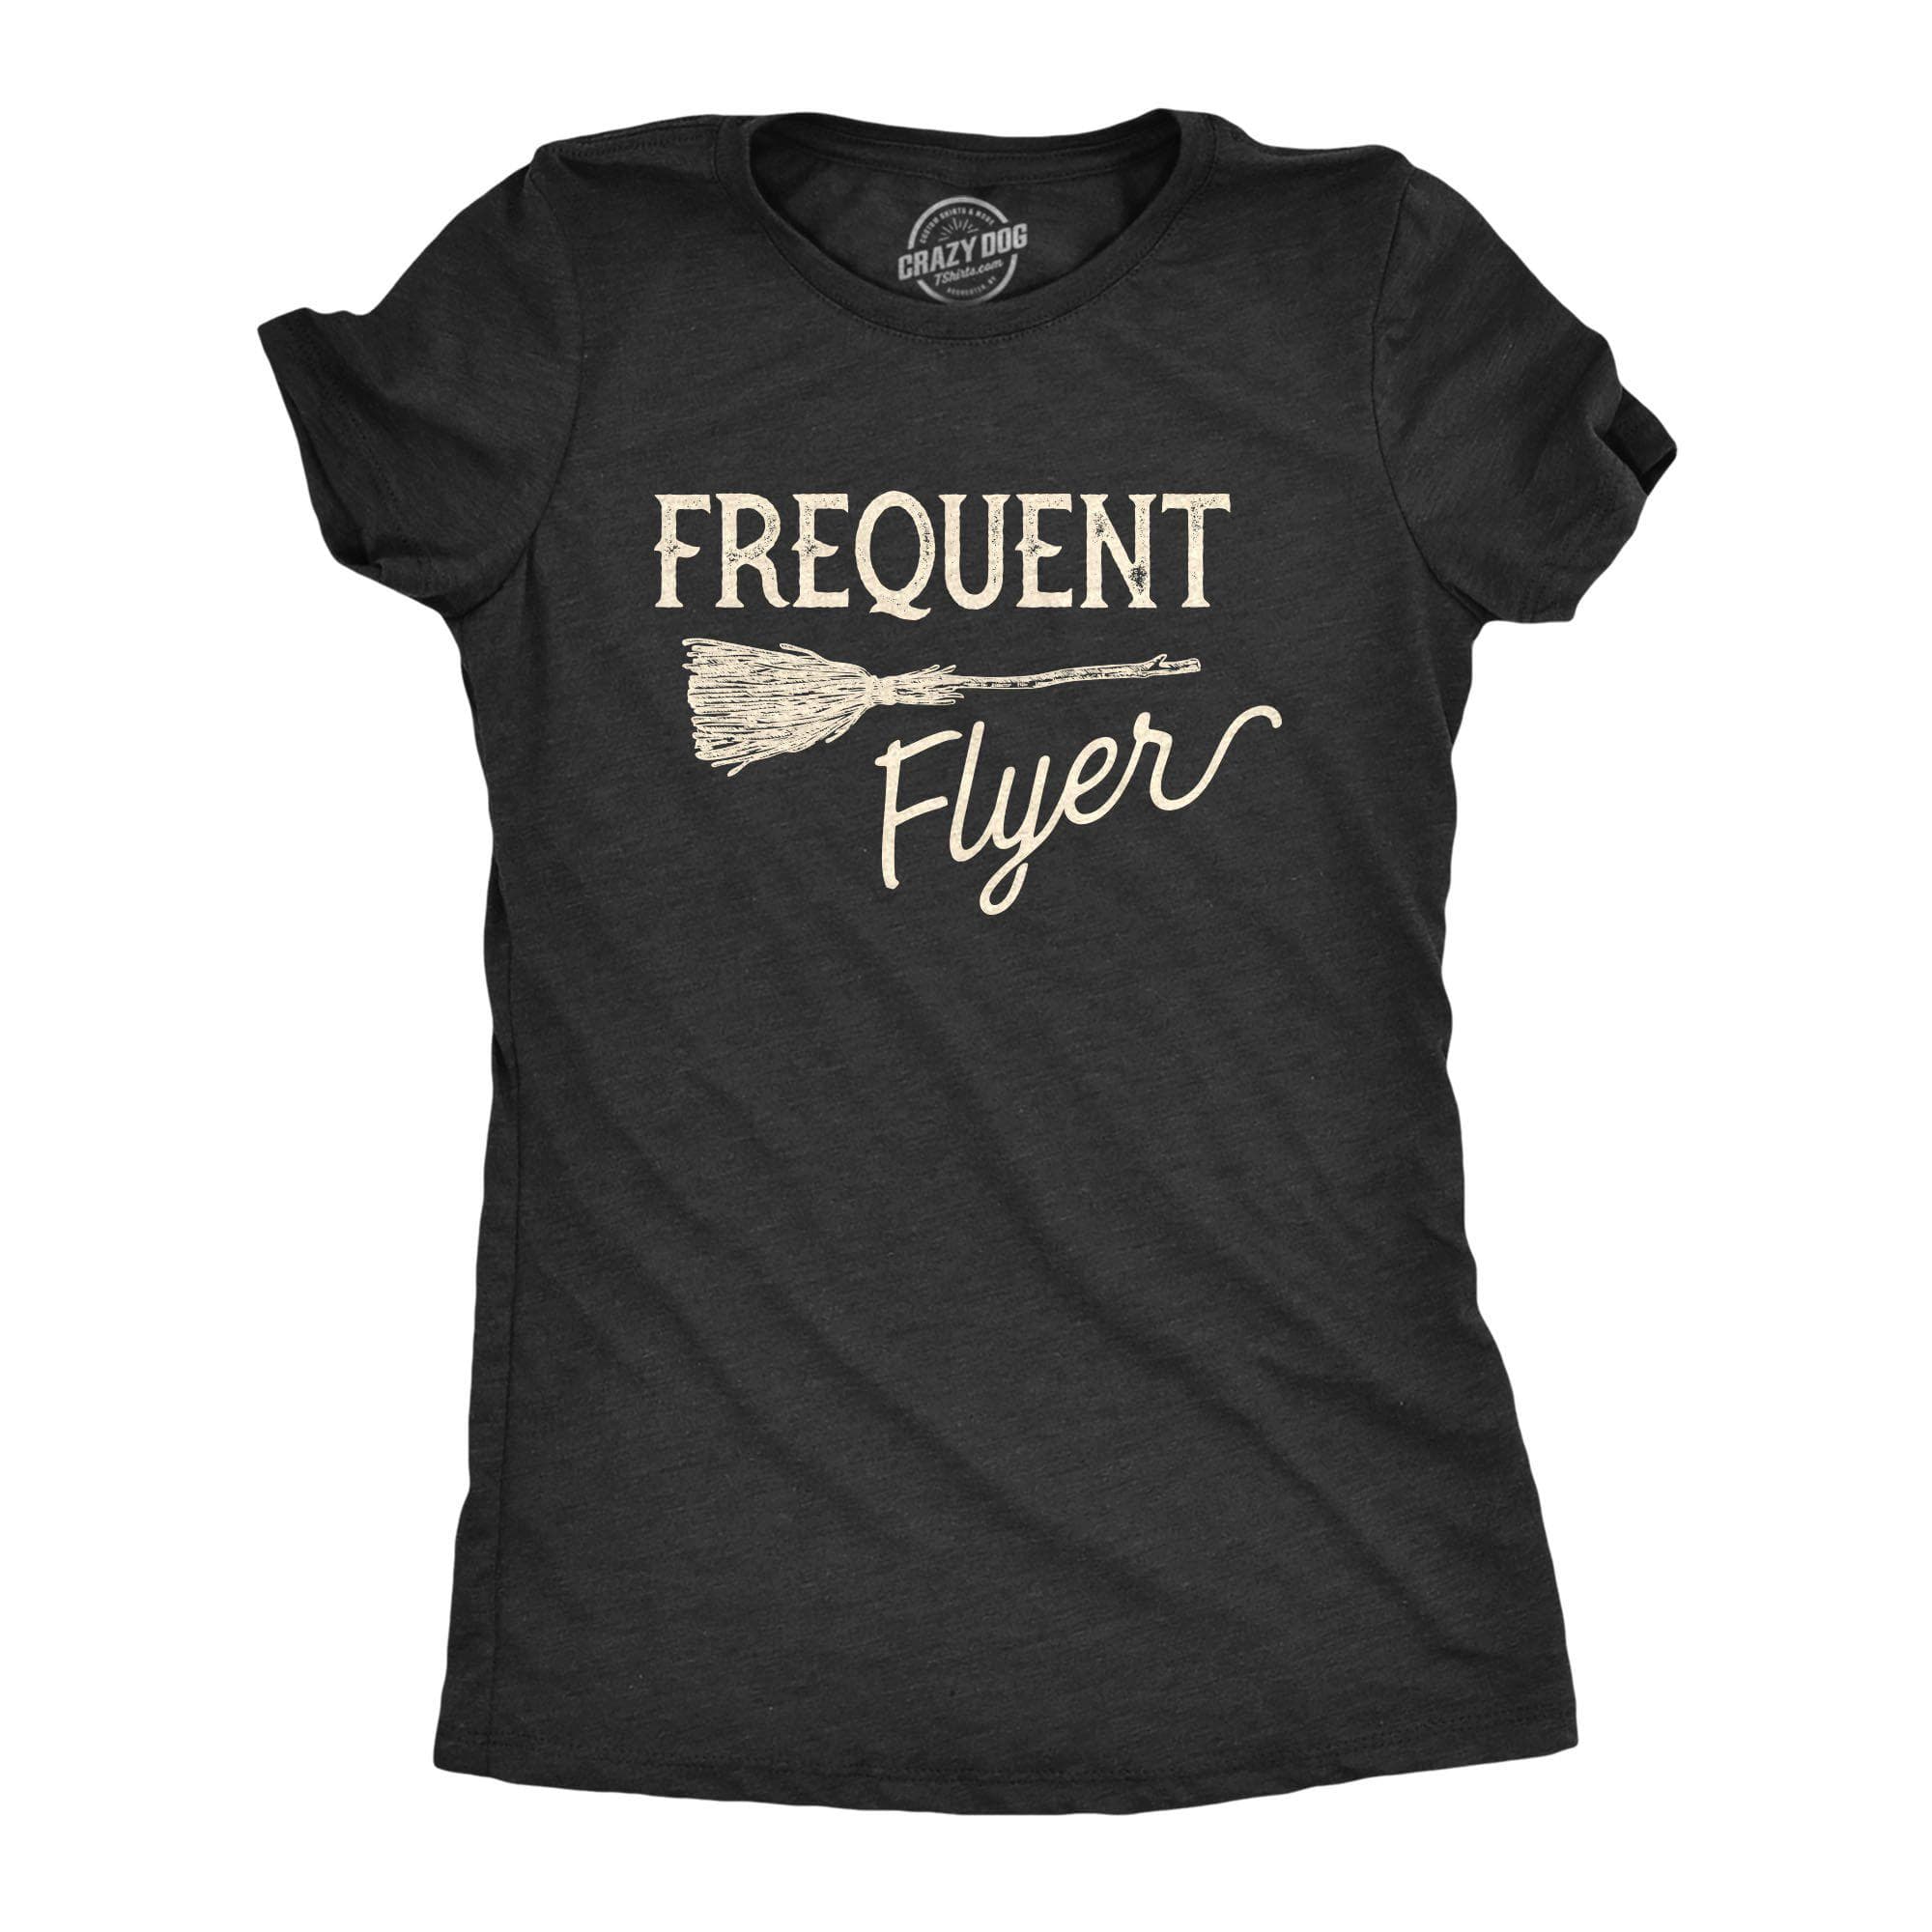 Frequent Flyer Women's Tshirt - Crazy Dog T-Shirts